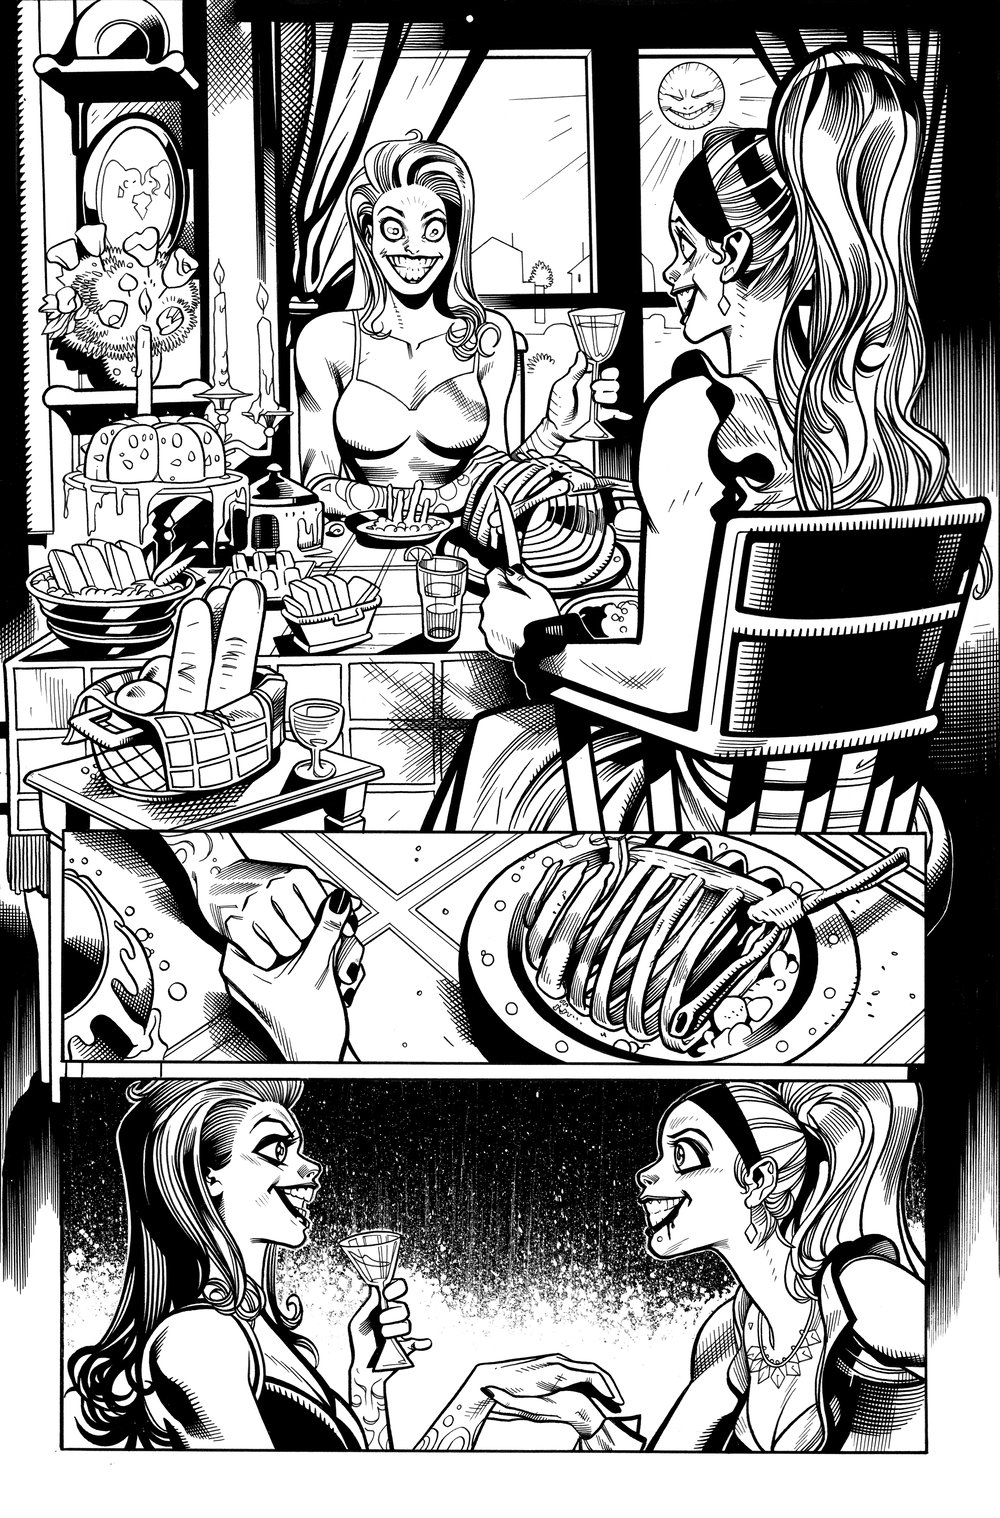 Image of Knight Terrors: Poison Ivy #2 PG 1